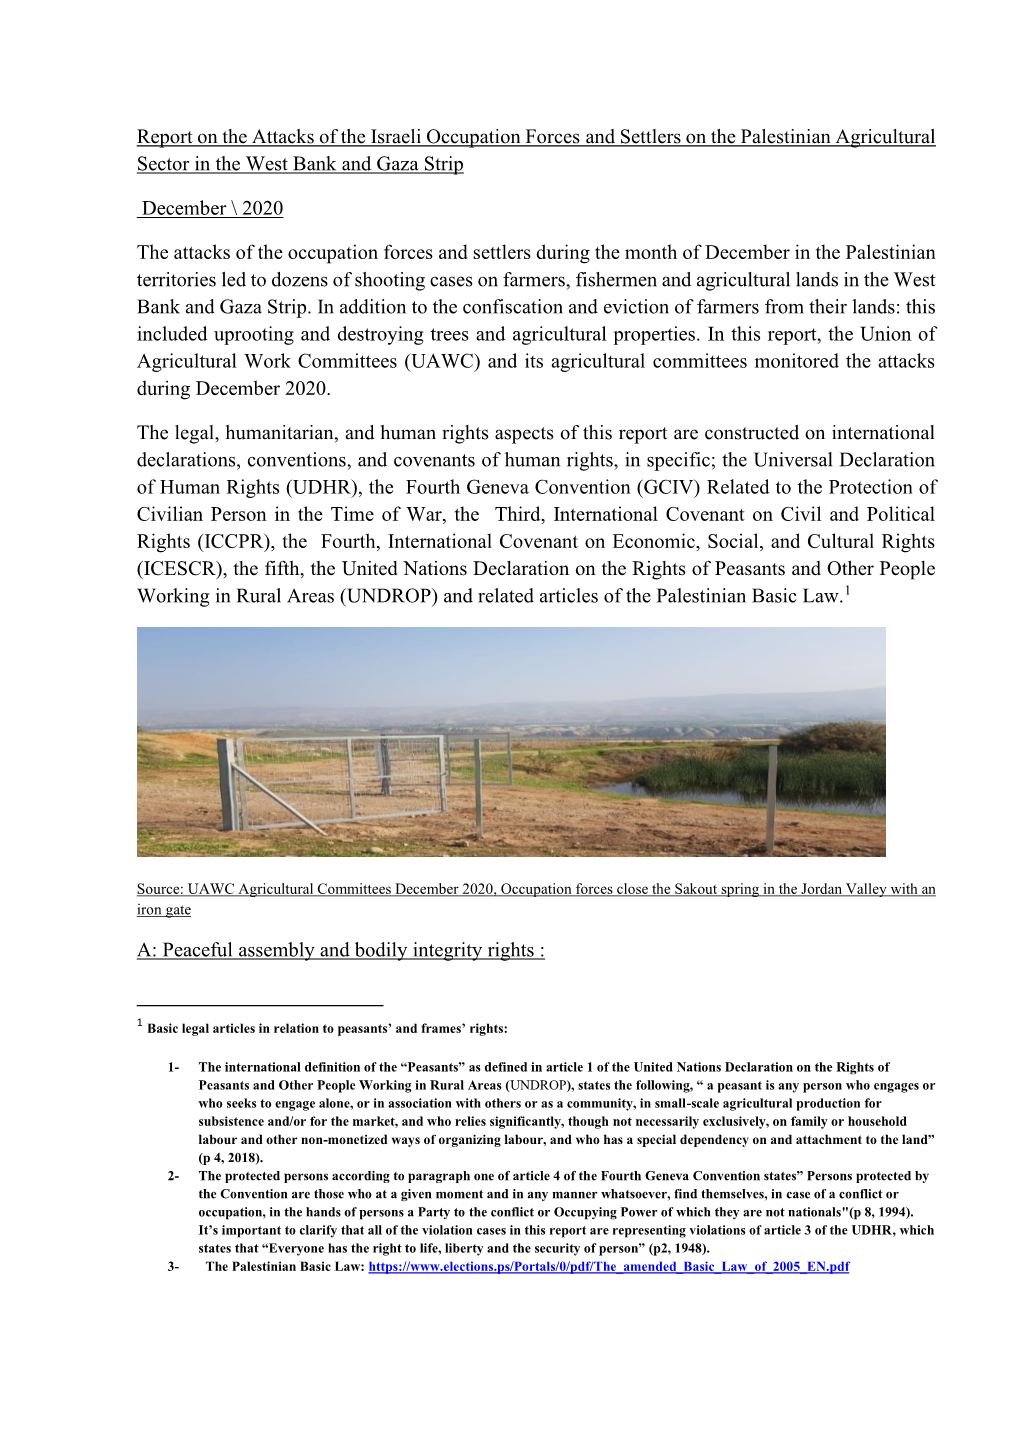 Report on the Attacks of the Israeli Occupation Forces and Settlers on the Palestinian Agricultural Sector in the West Bank and Gaza Strip